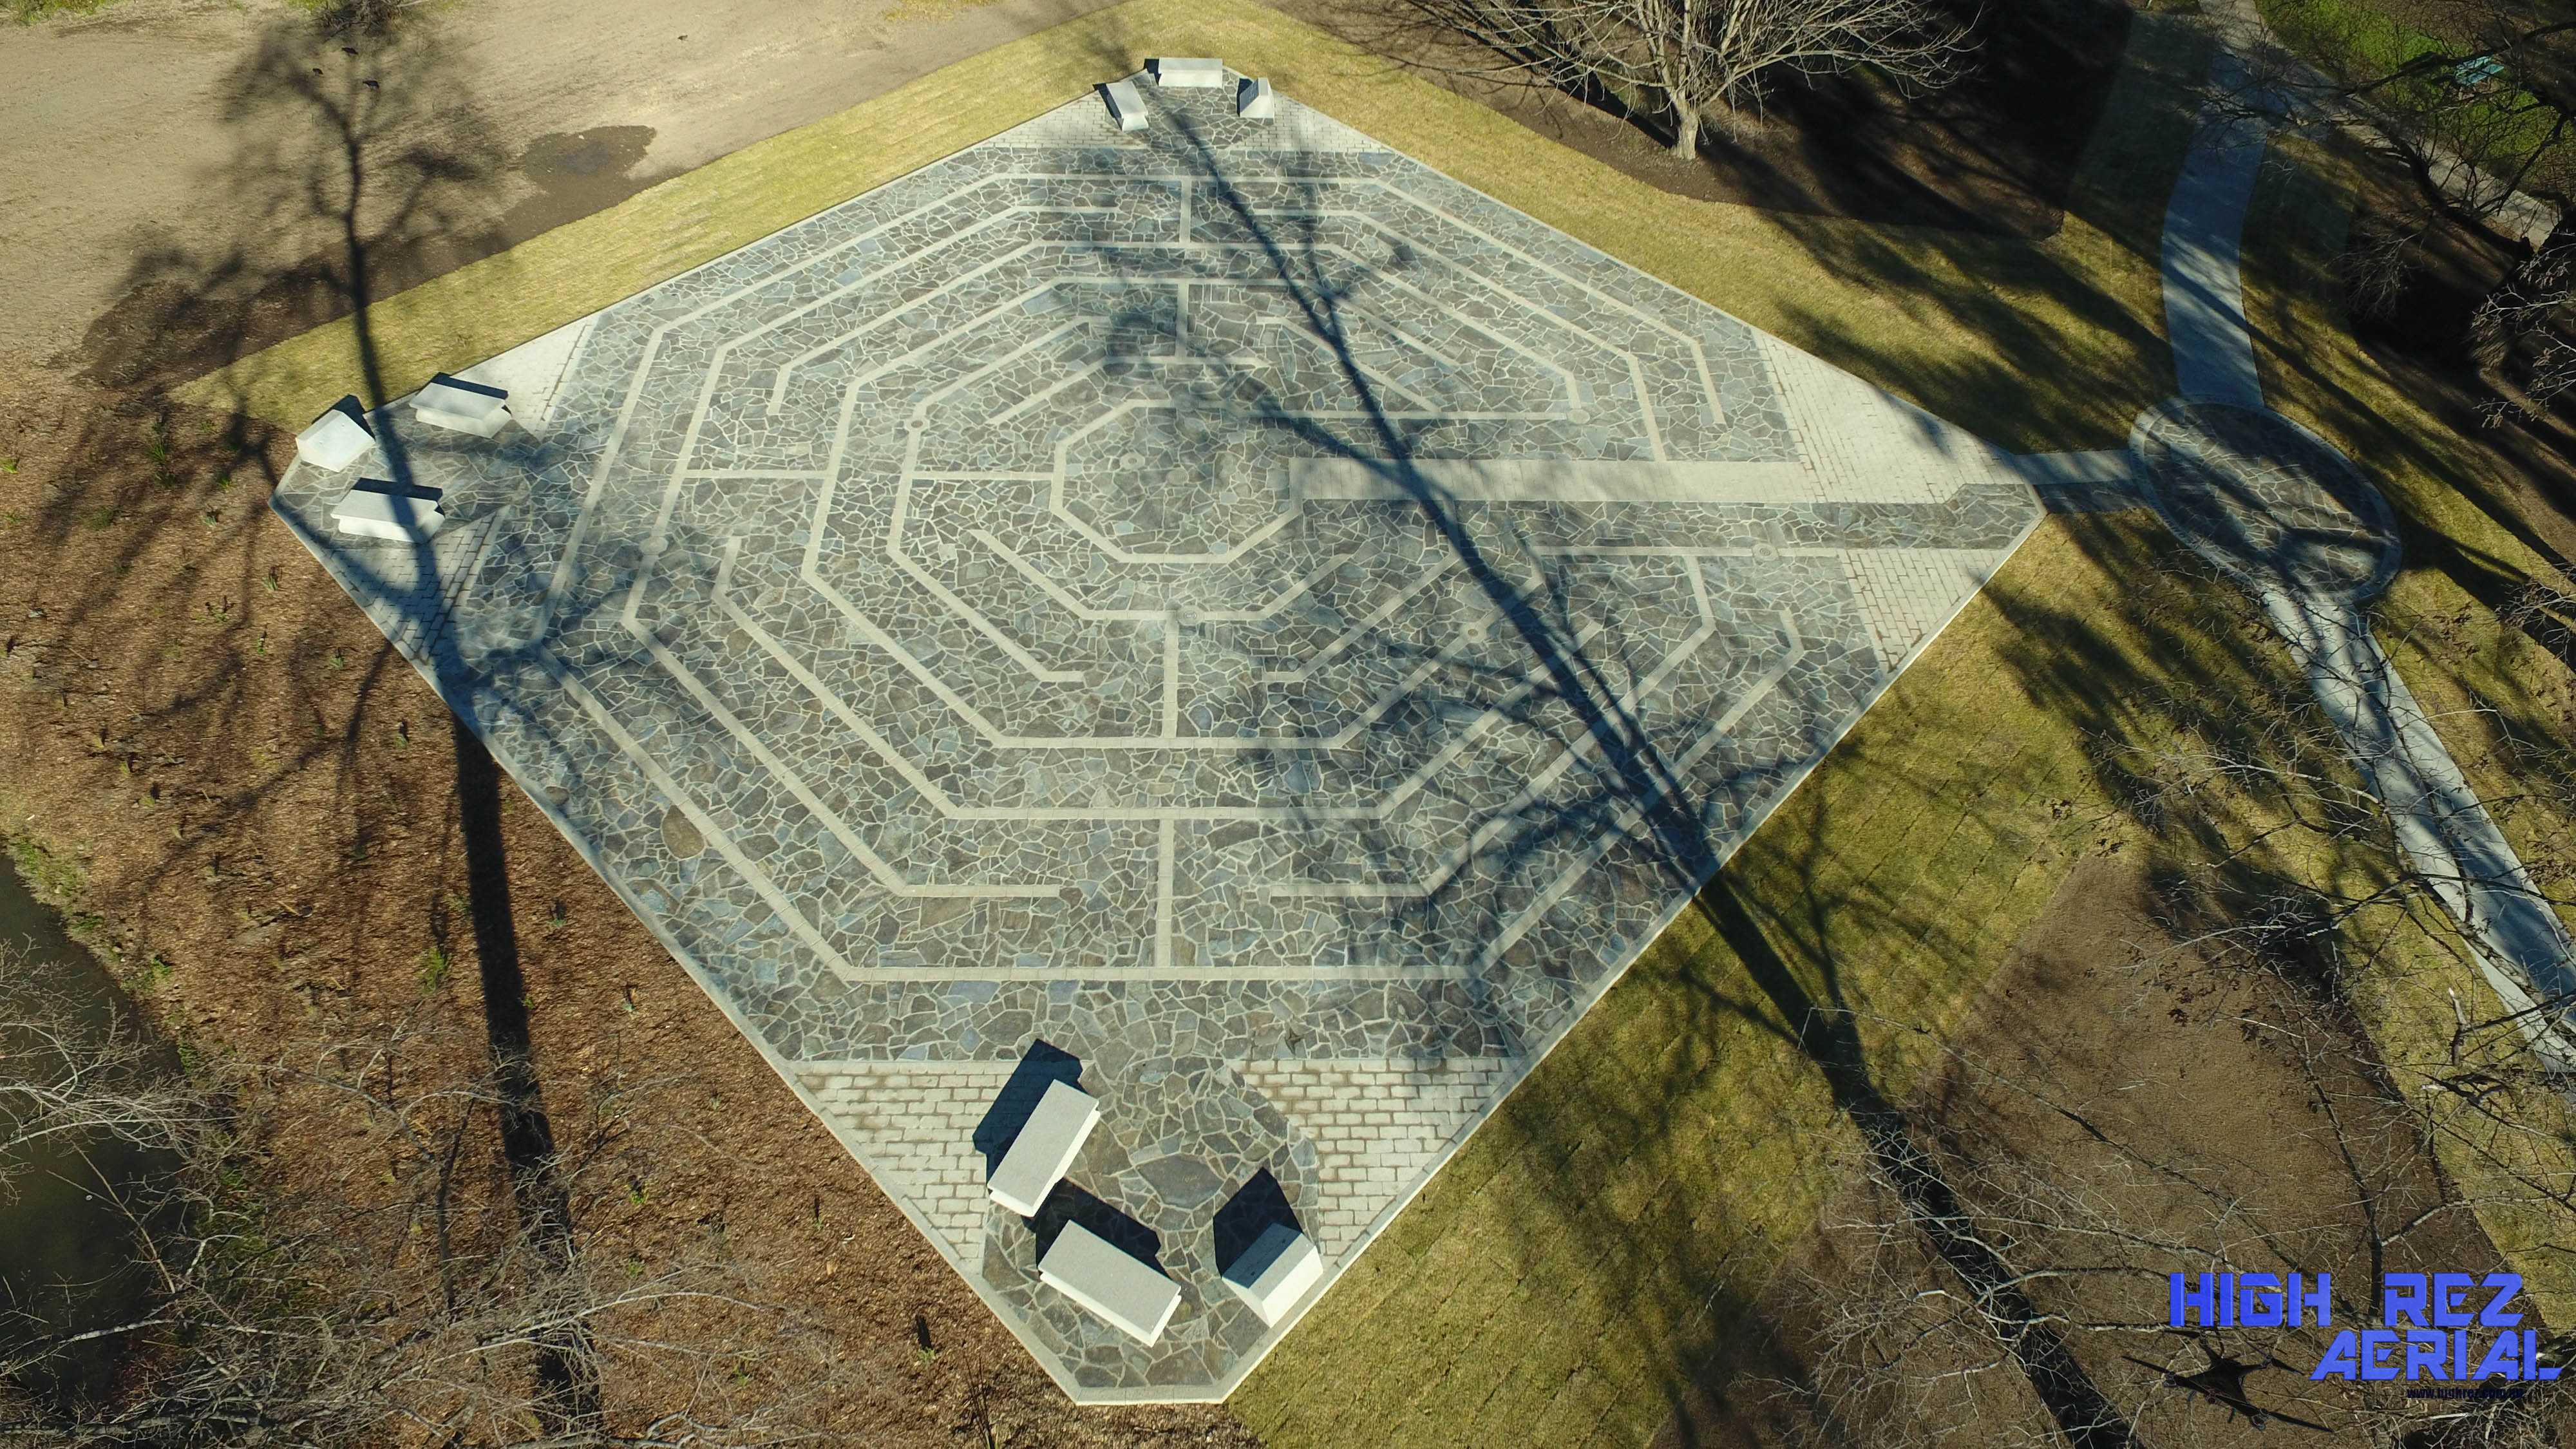 Aerial view of custom Paving work completed by Dan and Dan Landscaping for the Tumut Memorial Labyrinth